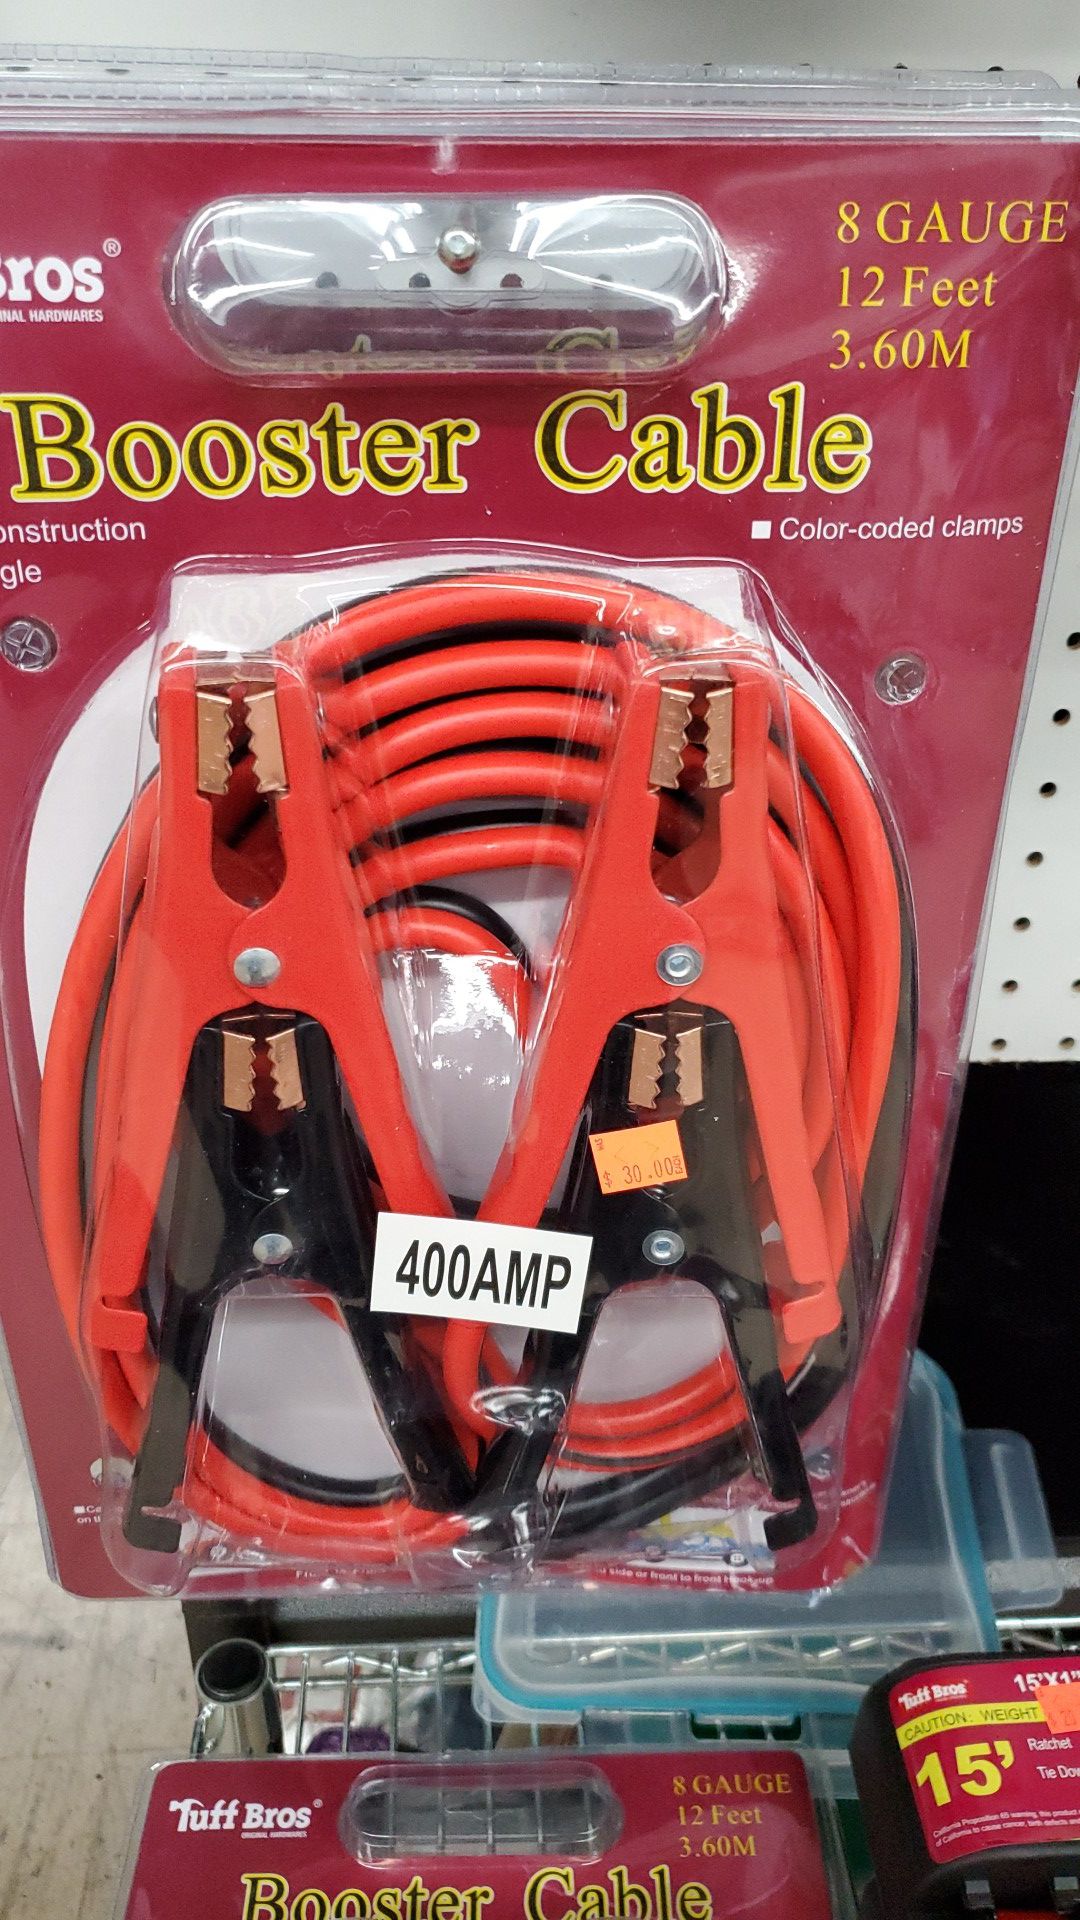 Booster Cables for car